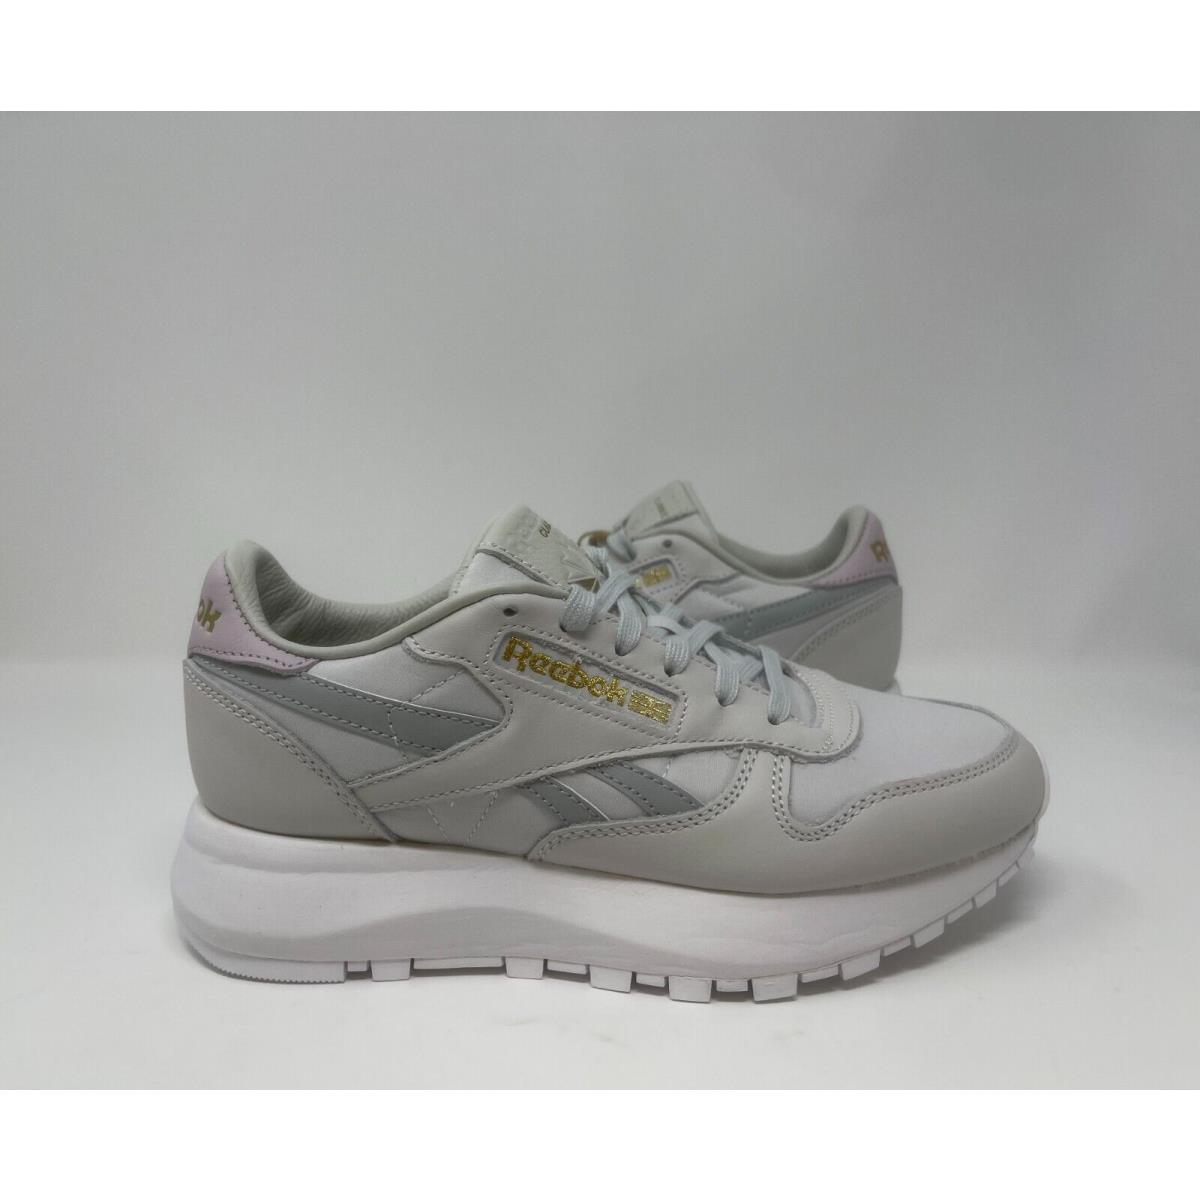 Reebok shoes Classic Leather - Gray 2